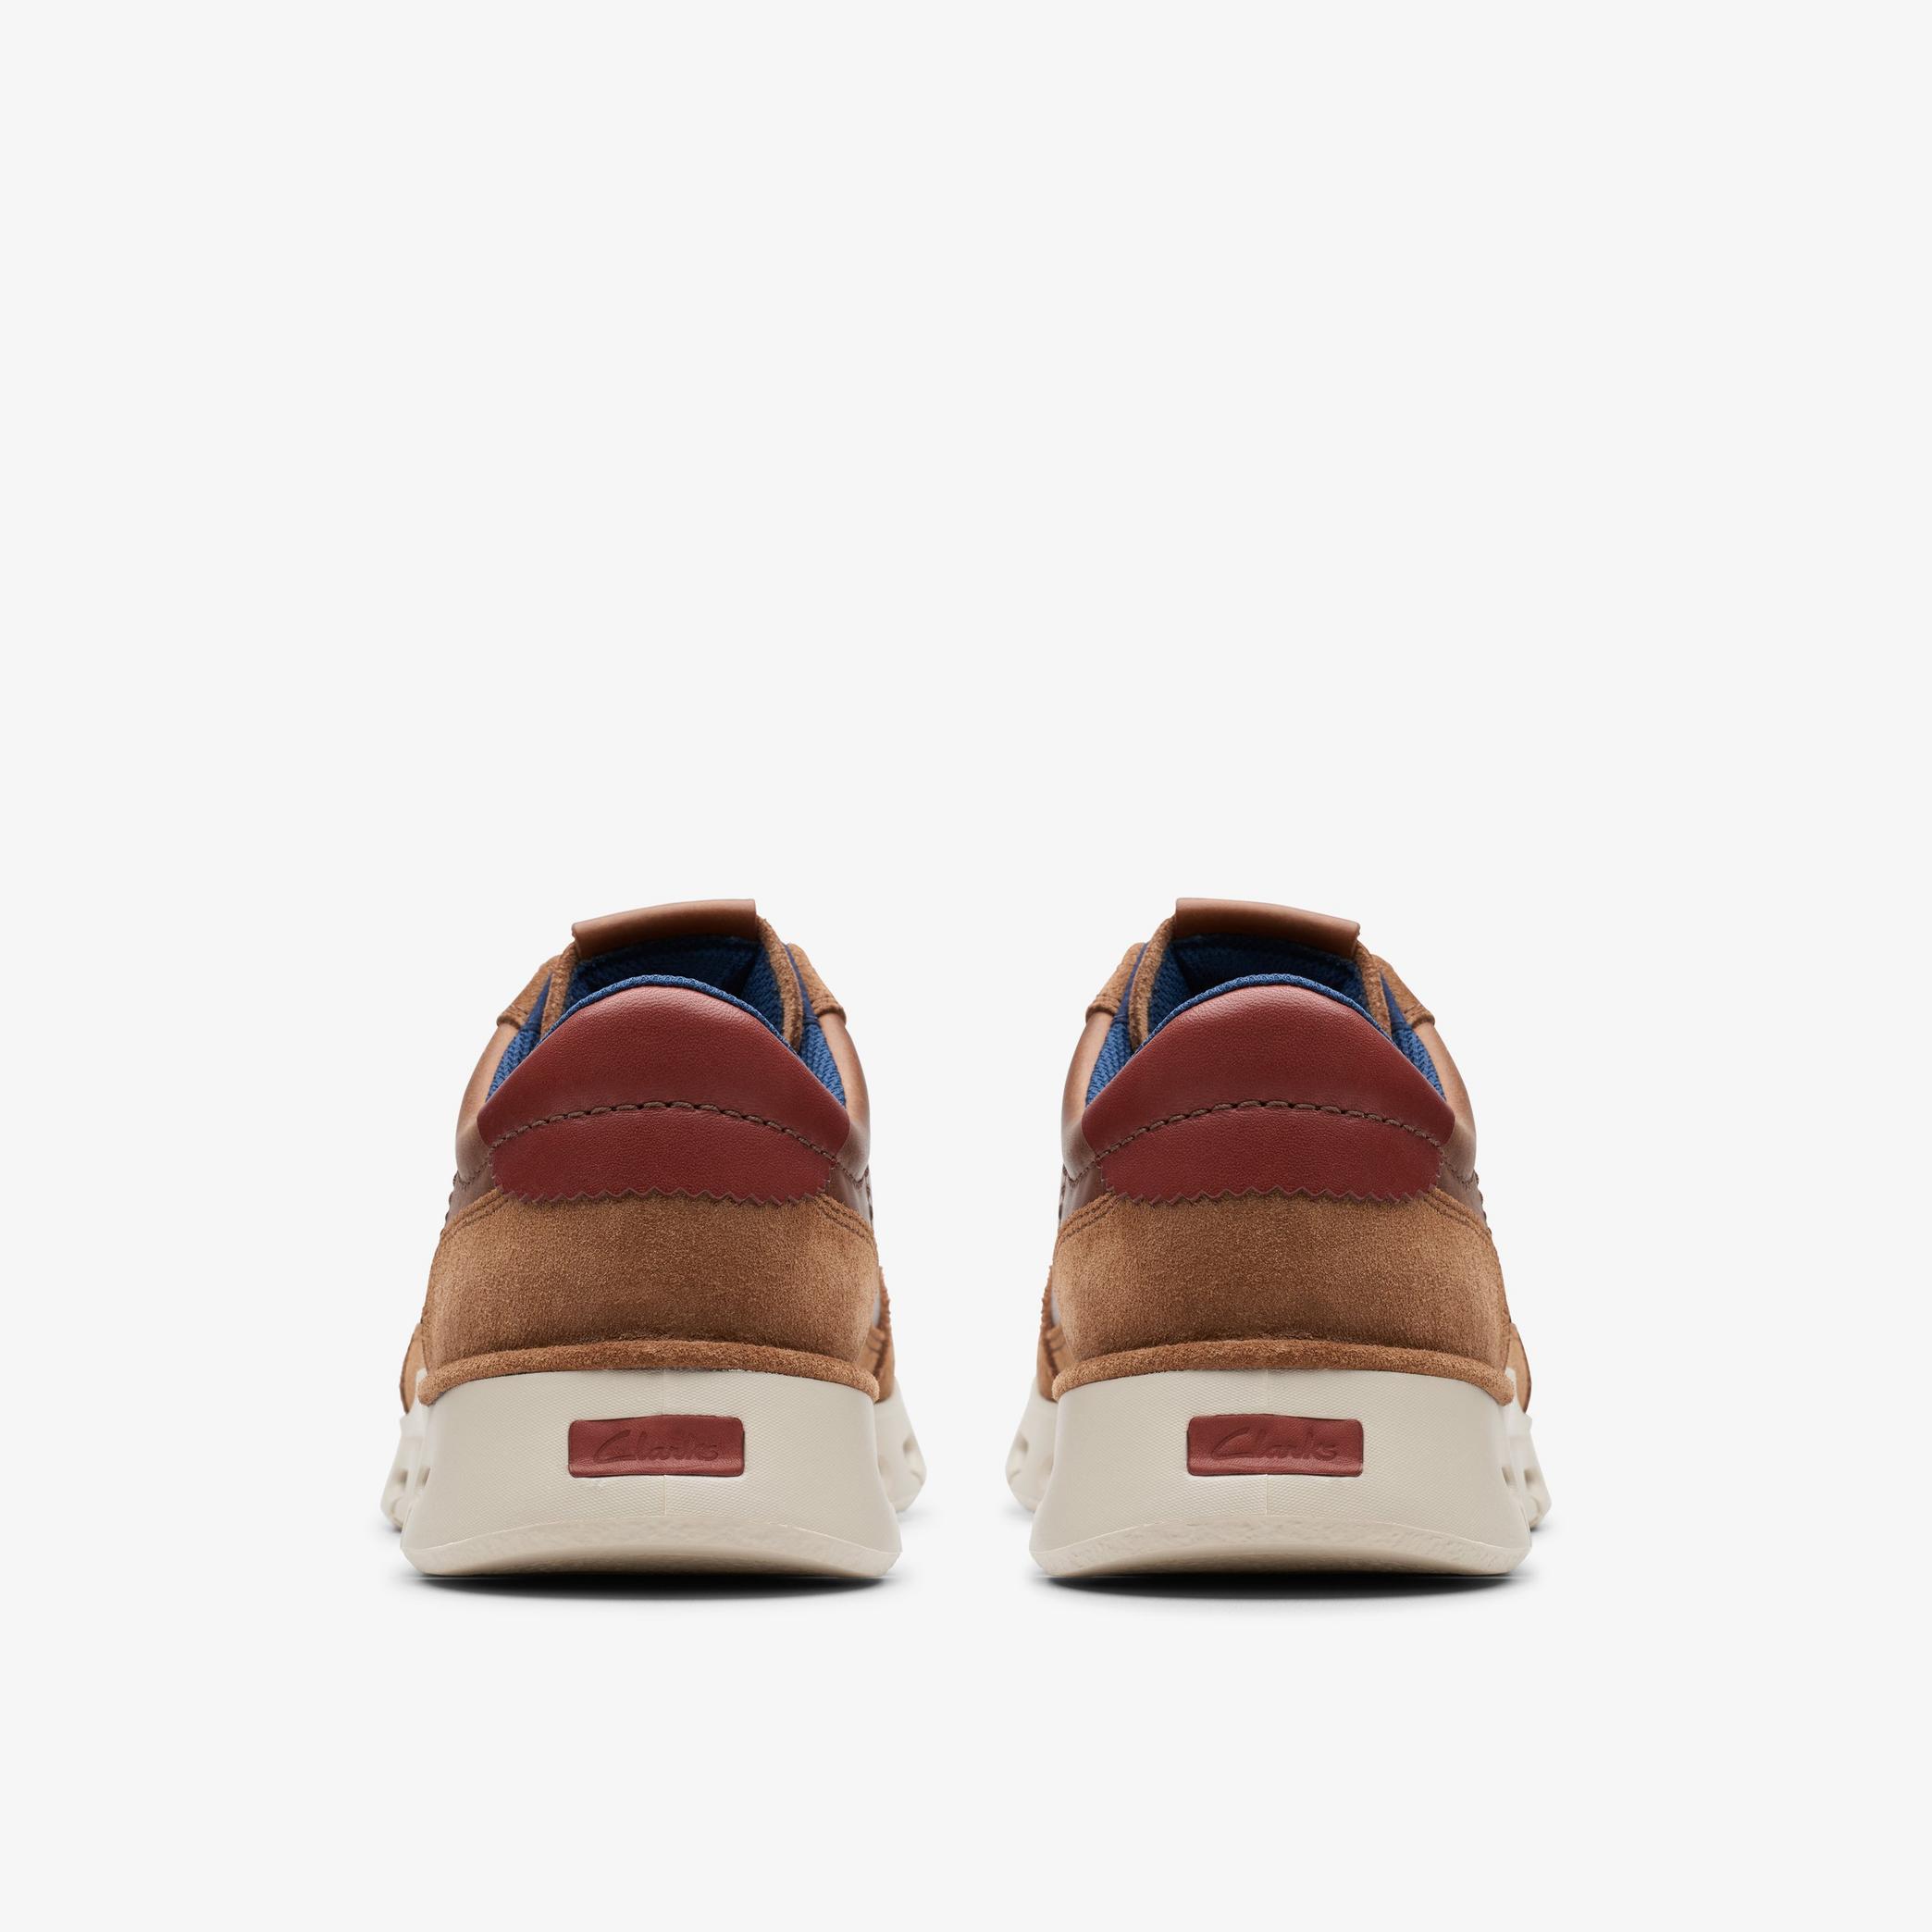 Nature X One Dark Tan Leather Sneakers, view 5 of 6